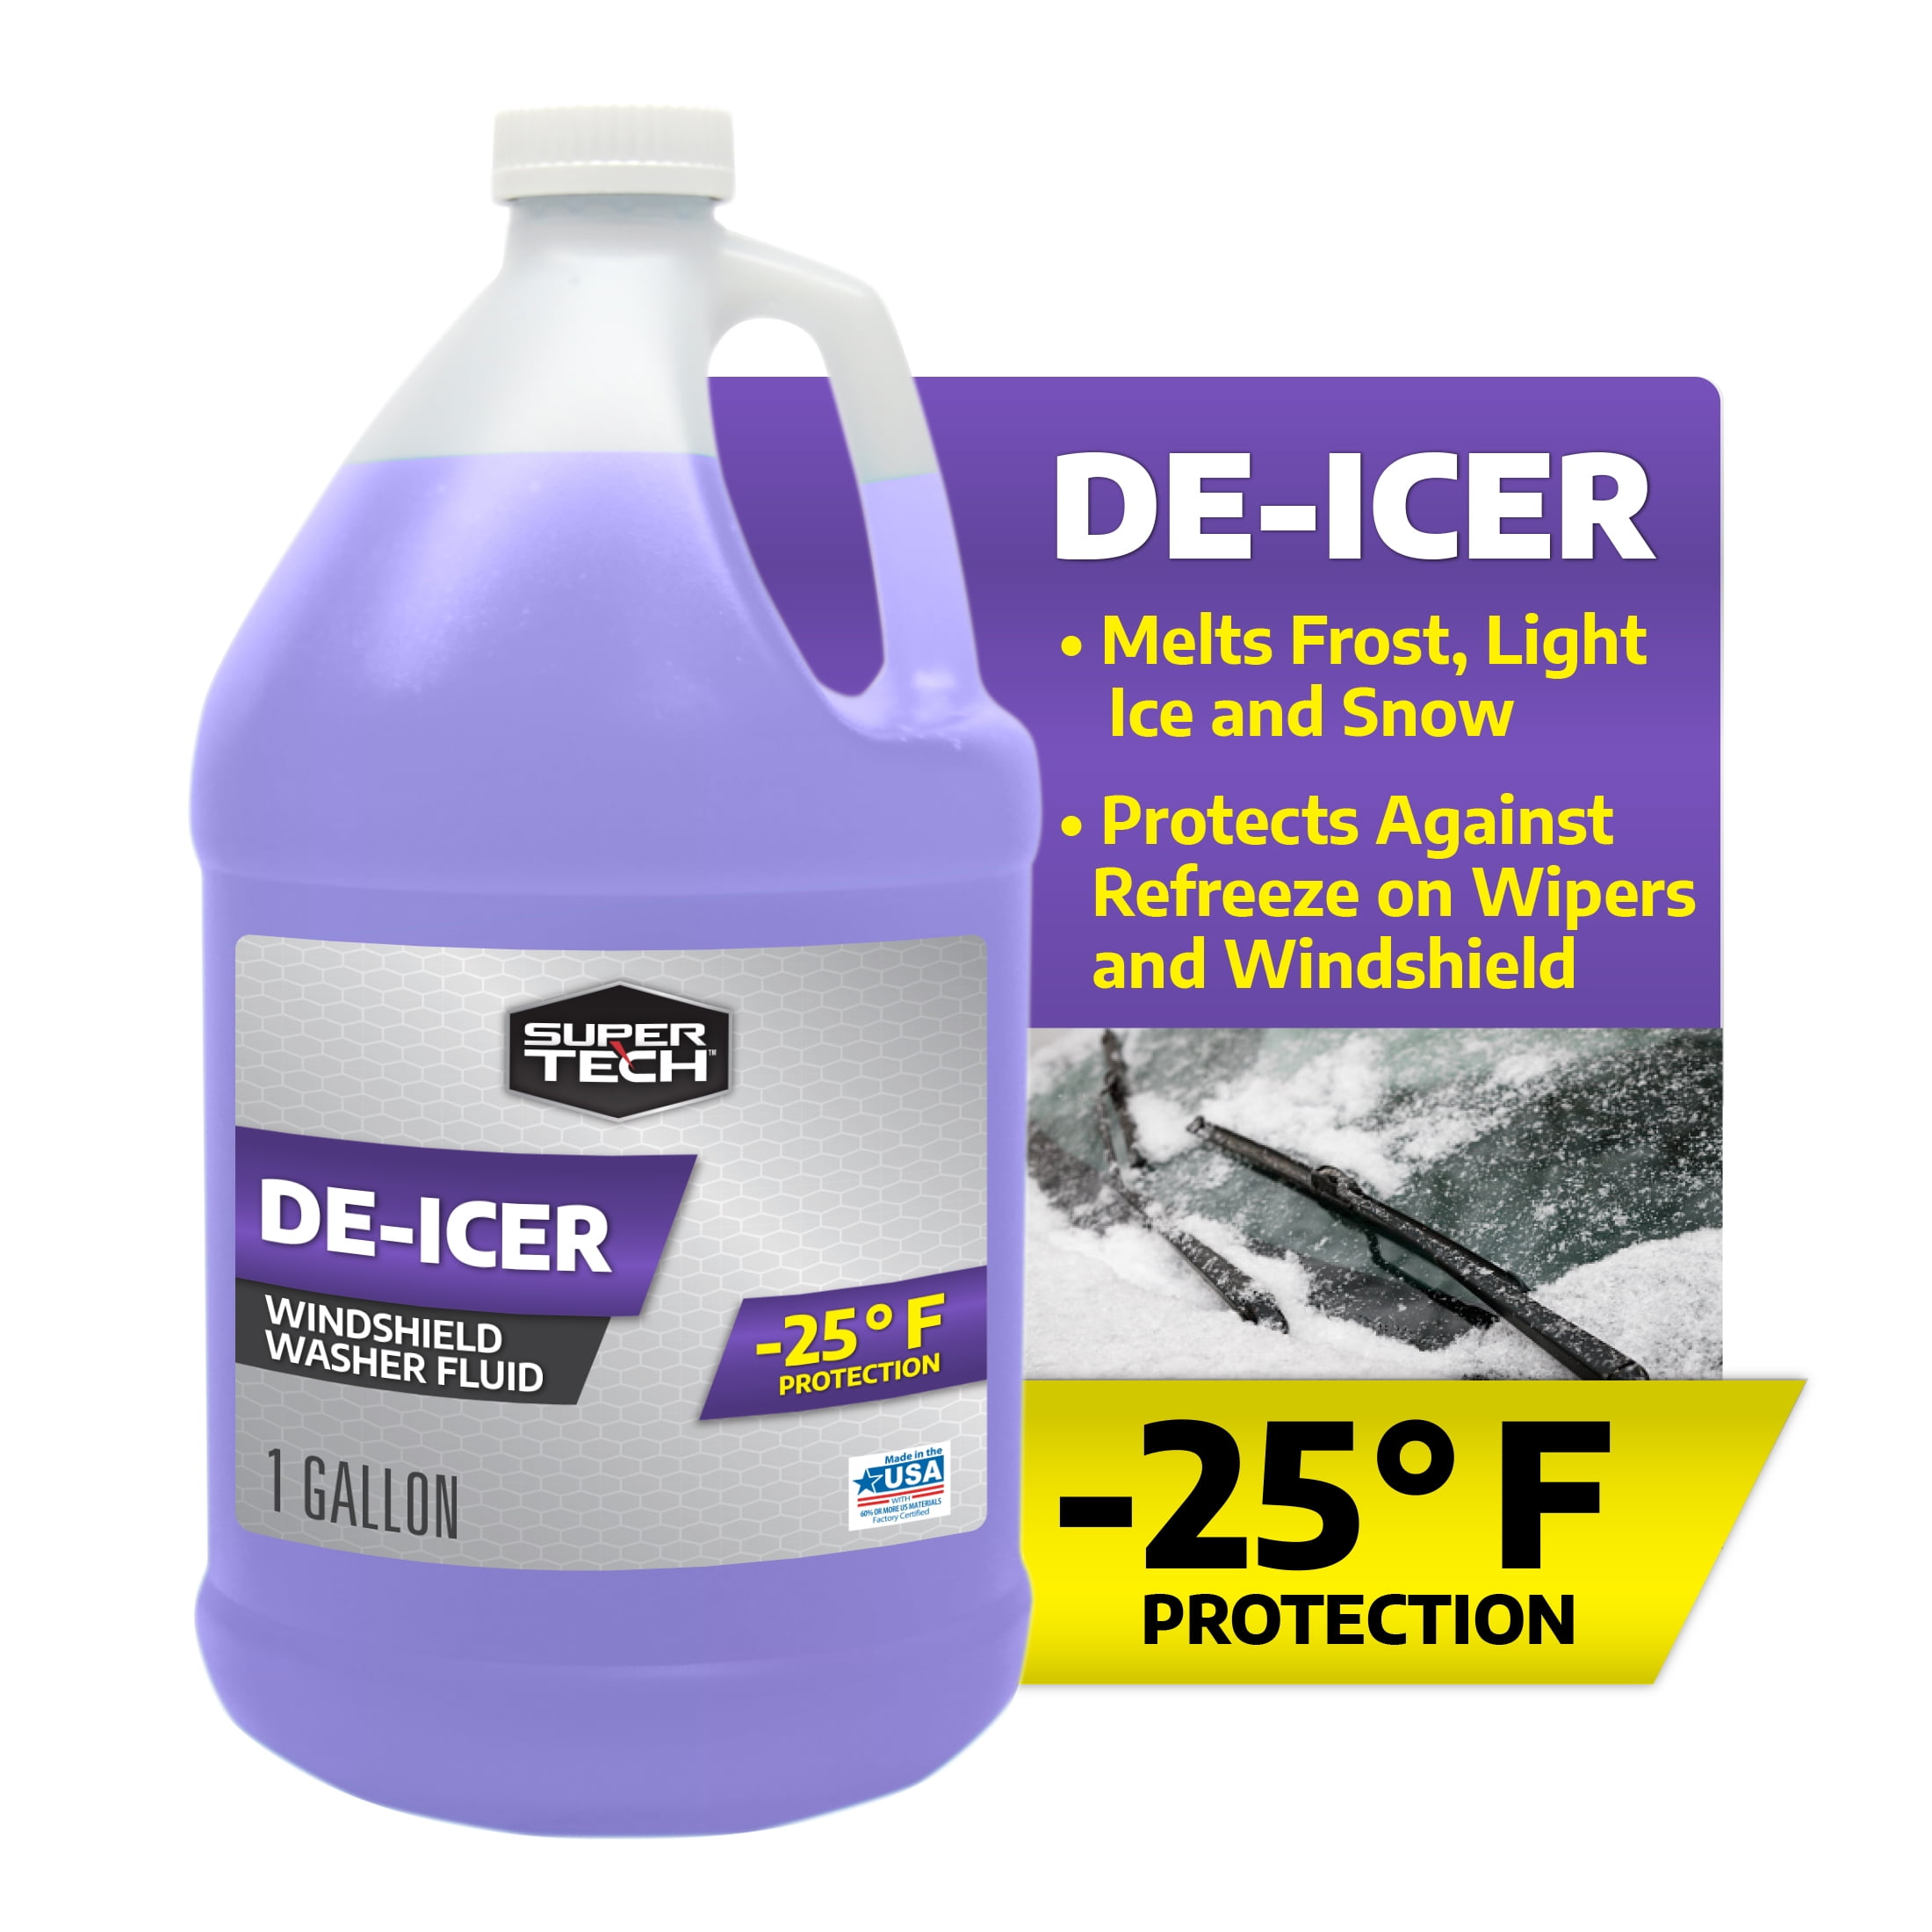 Super Tech Windshield Deicer Spray 11oz Canisters - 12-Pack